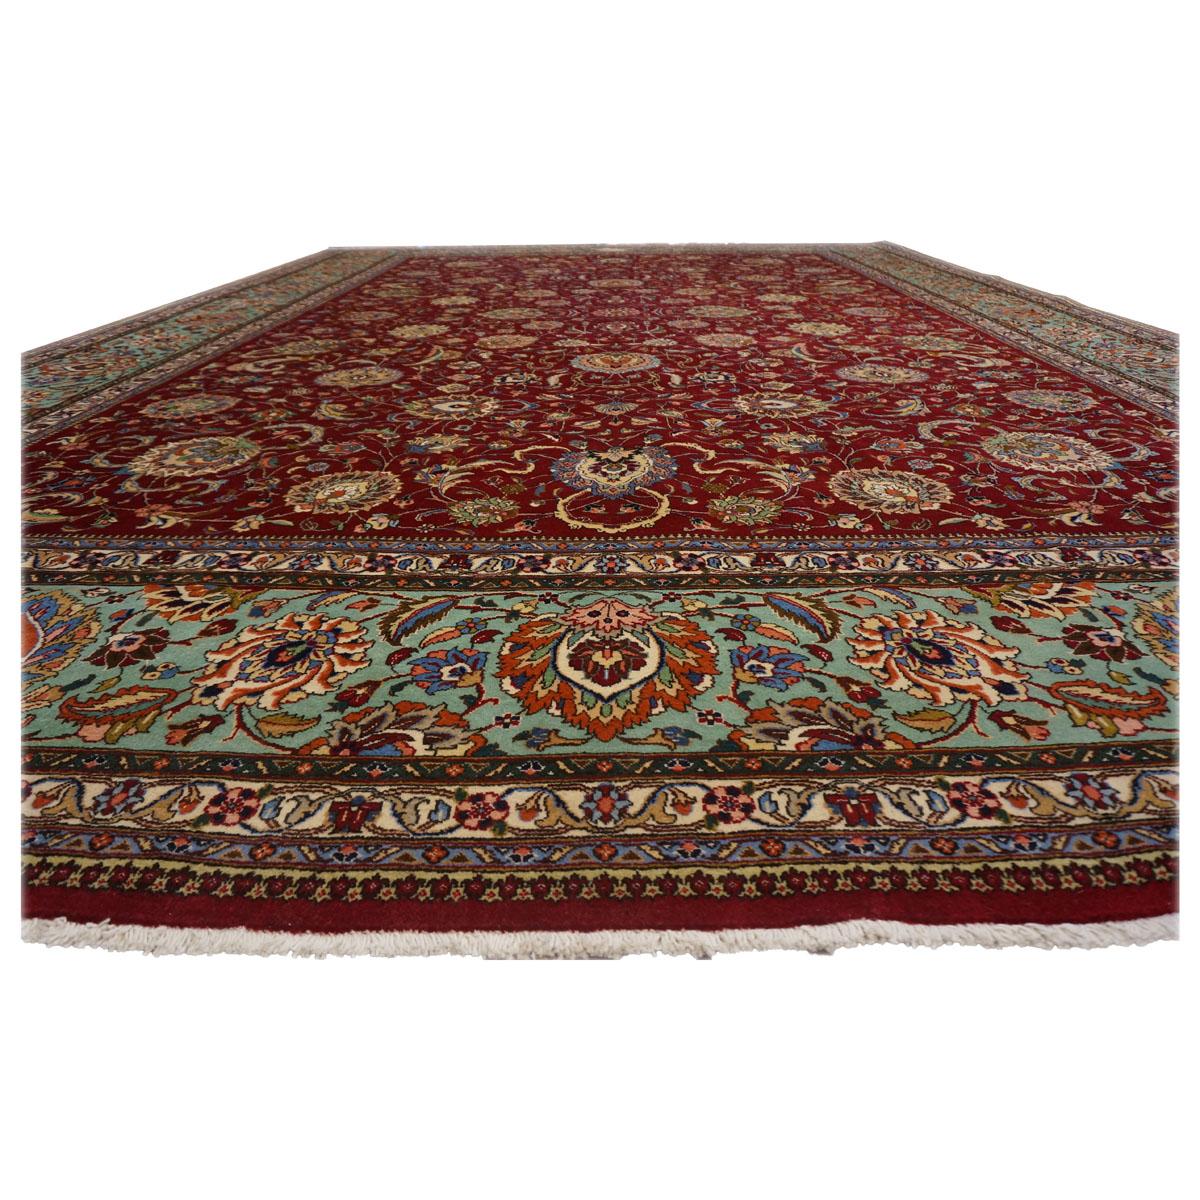 Antique 1940s Persian Tabriz Pahlavi 11x16 Red, Teal, & Ivory Handmade Area Rug In Good Condition For Sale In Houston, TX